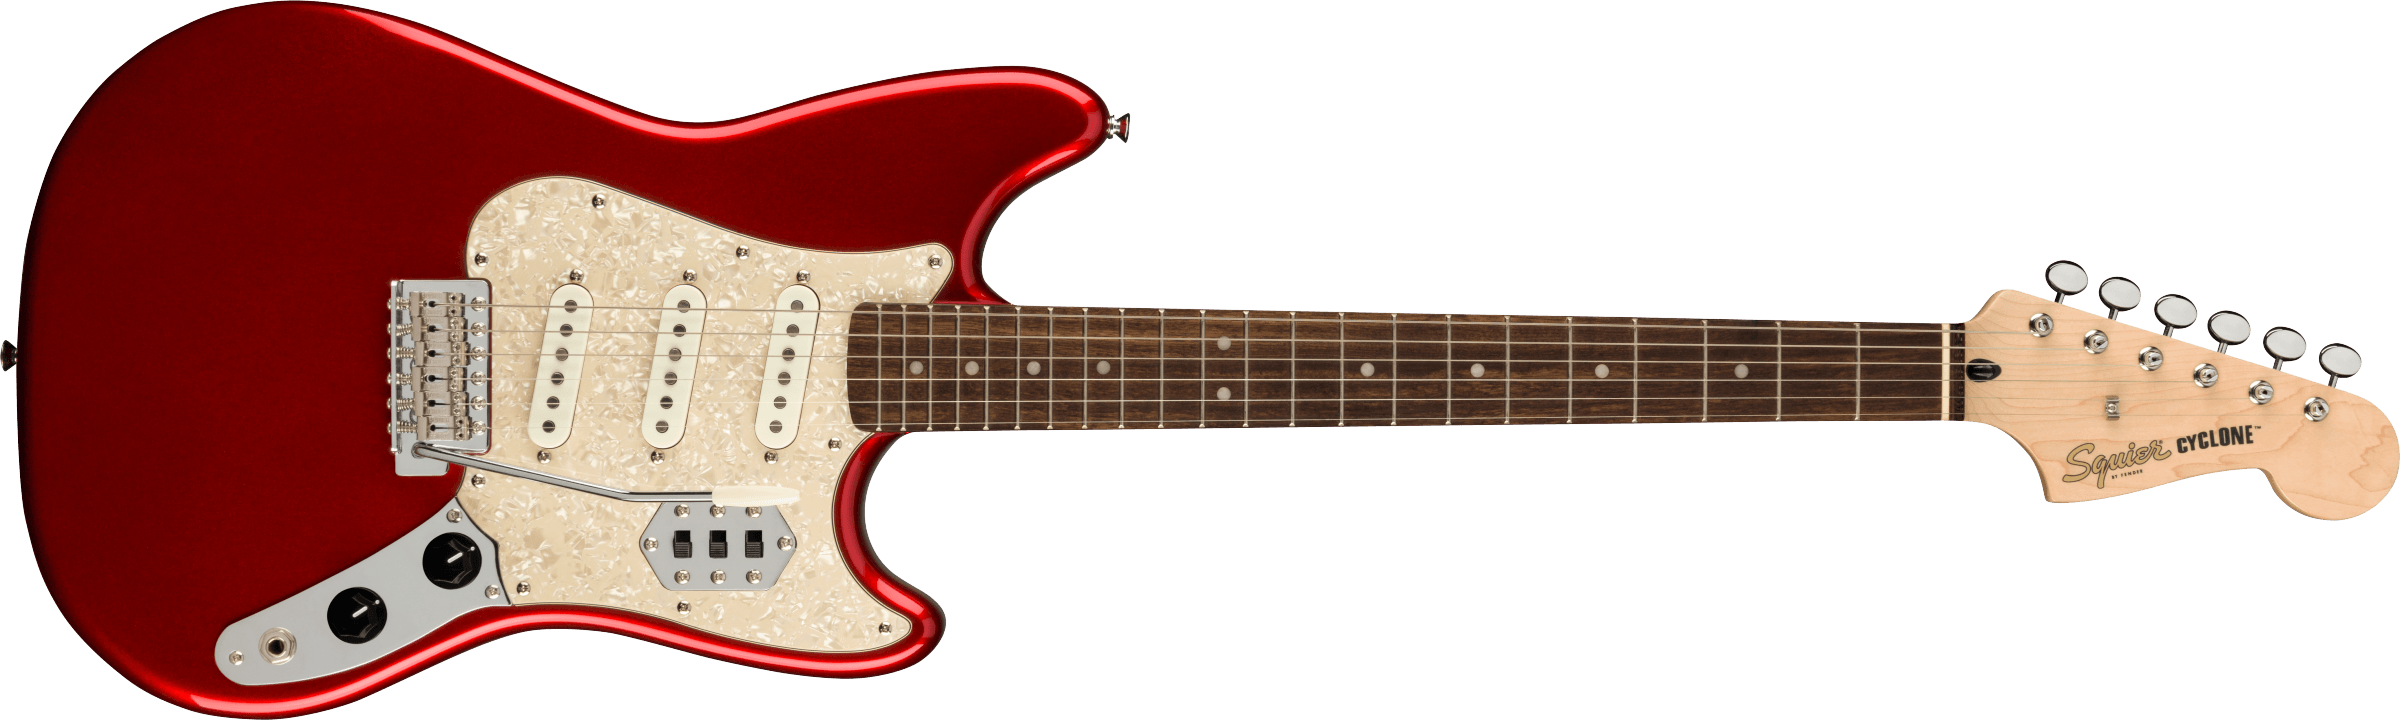 Squier Paranormal Cyclone Pearloid Pickguard, Candy Apple Red F-0377010509